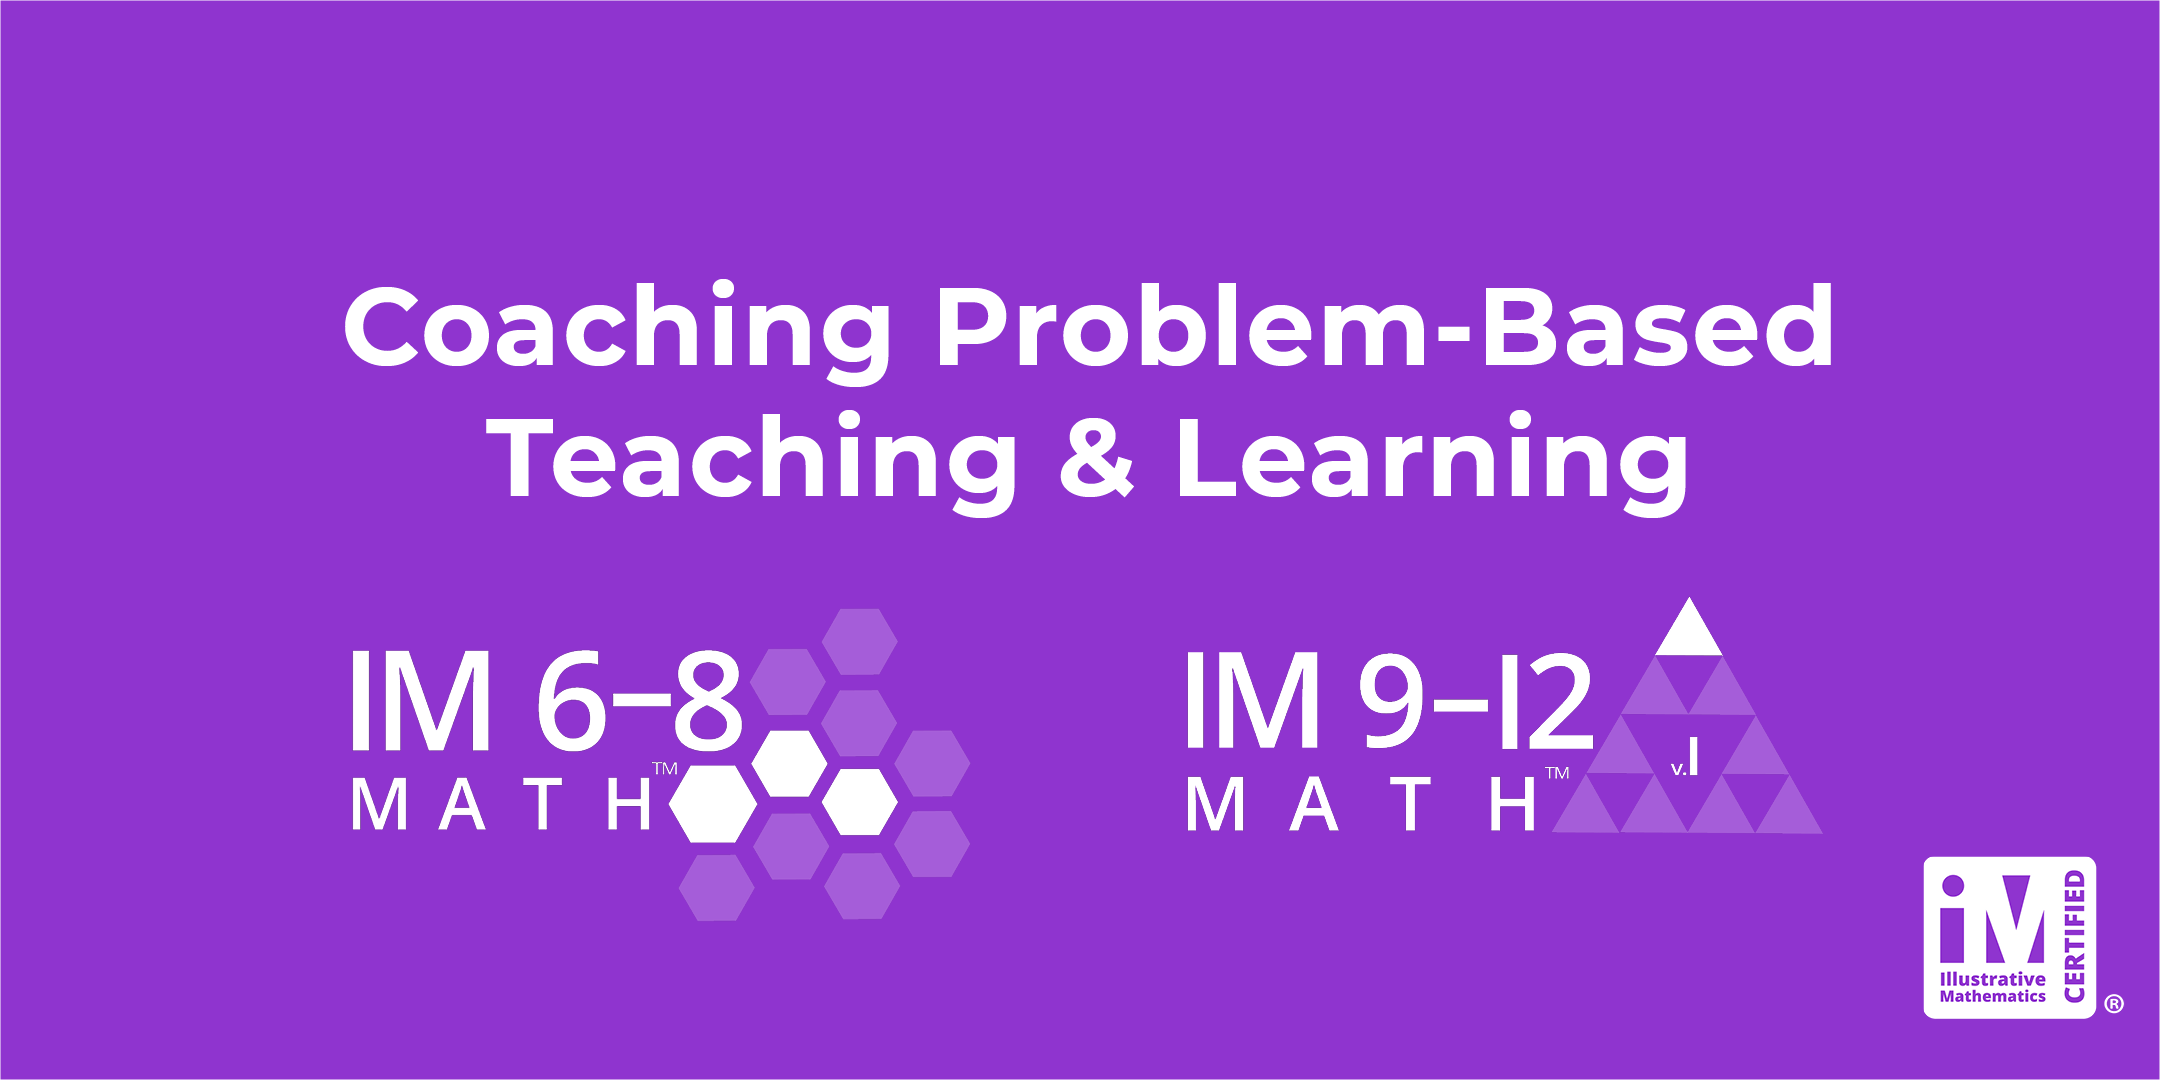 IM 6-12 Math: Coaching Problem-Based Teaching and Learning